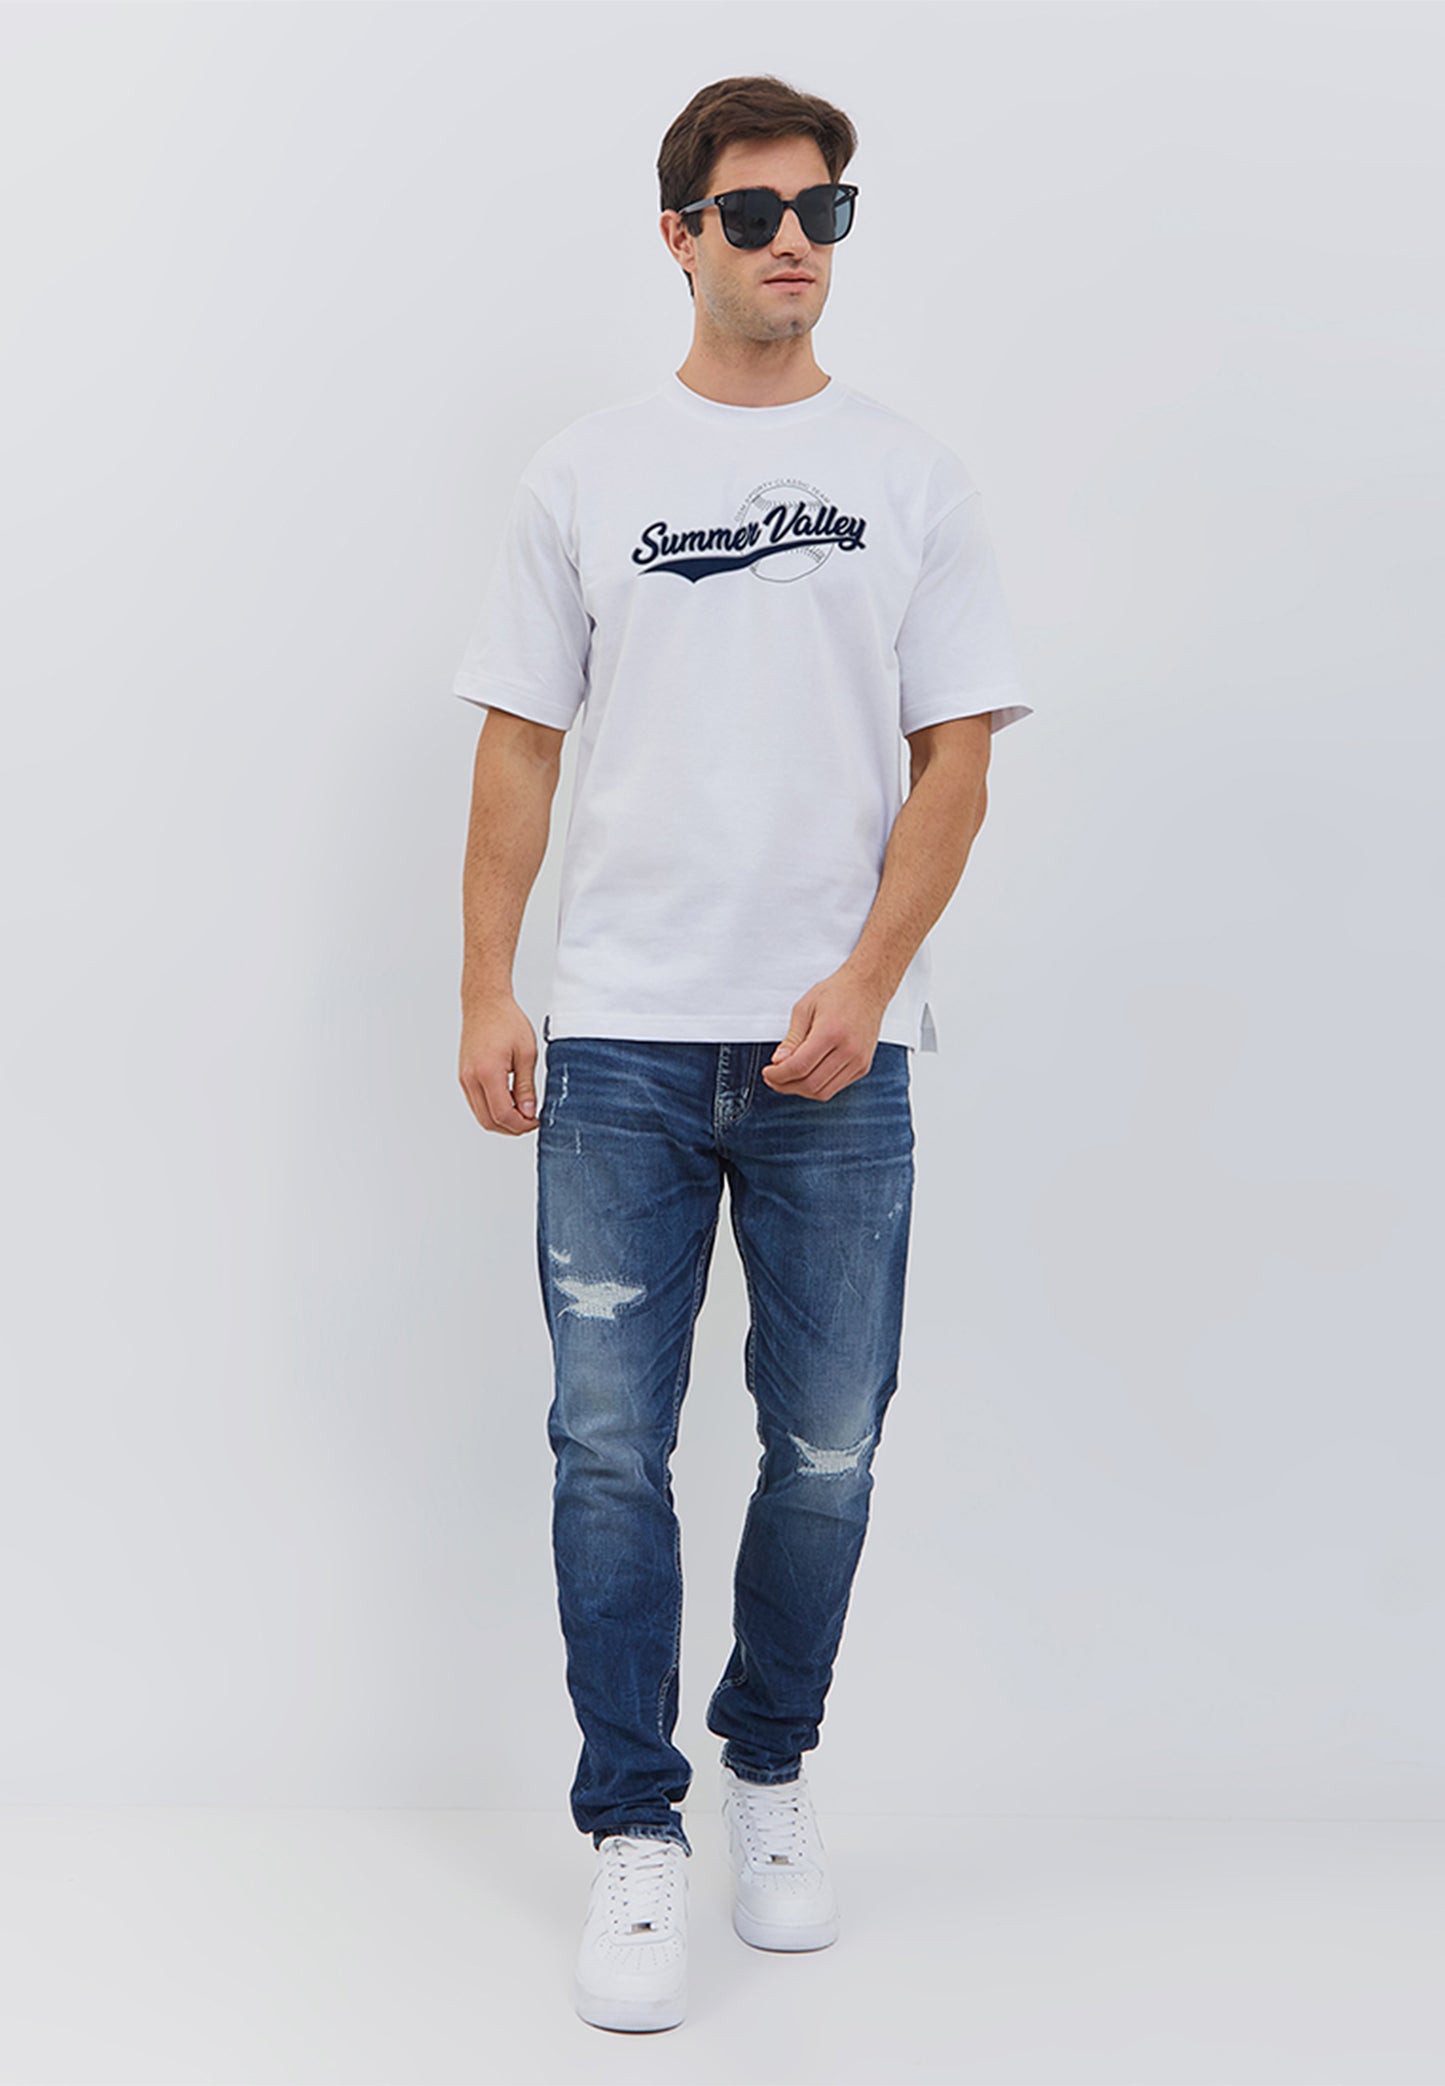 Osella Summer Valley Relaxed T-Shirt In White